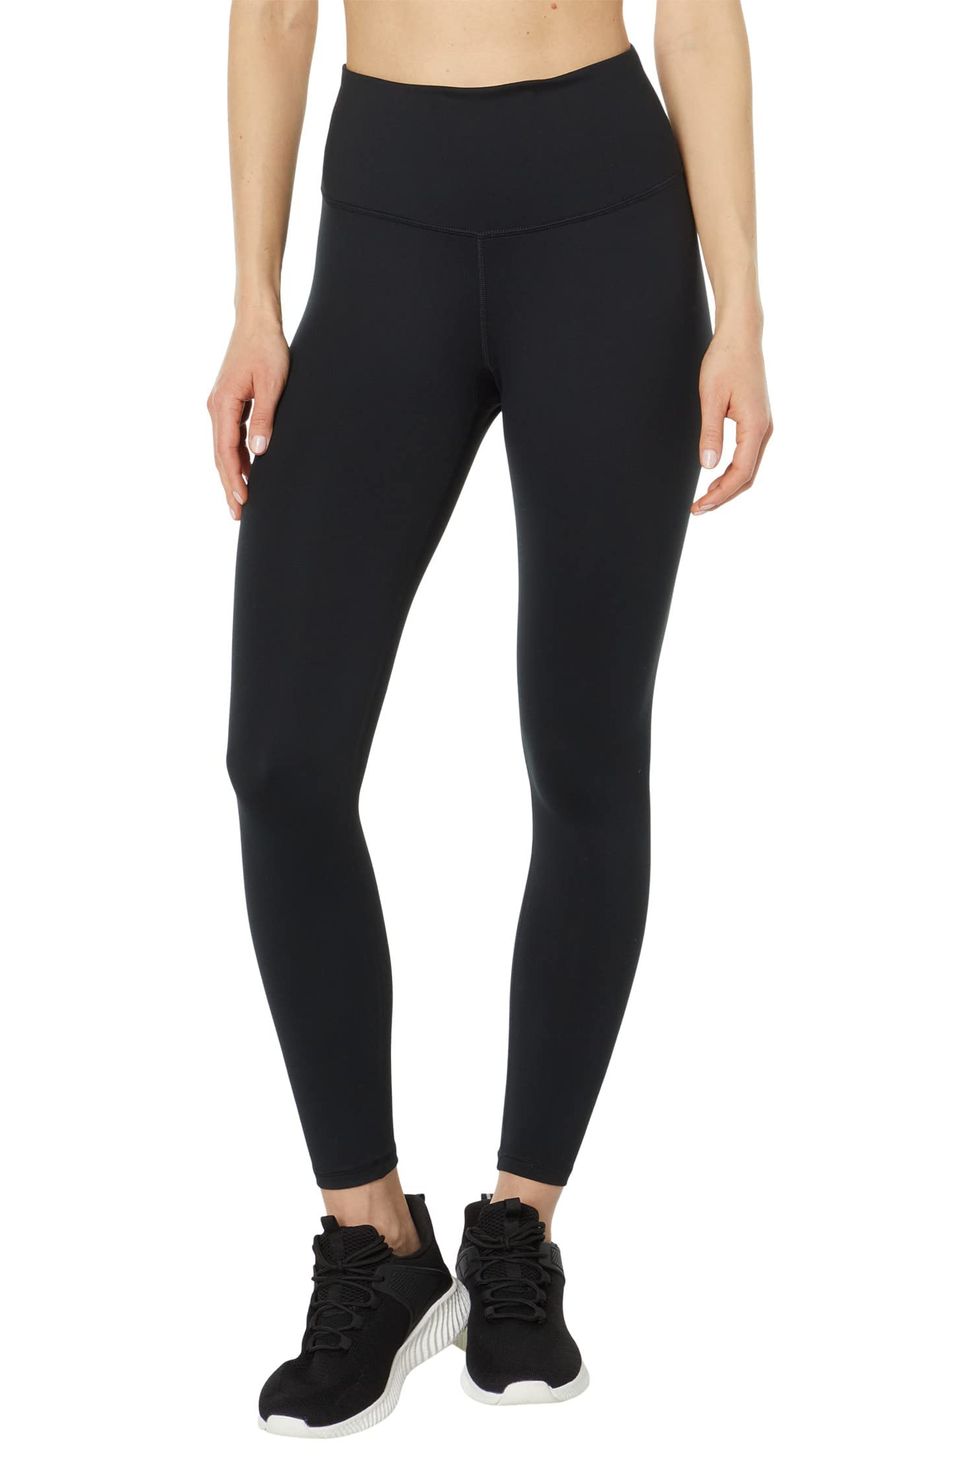 IUGA High Waisted Crossover Bootcut Yoga Pants With Pockets - Black / XS